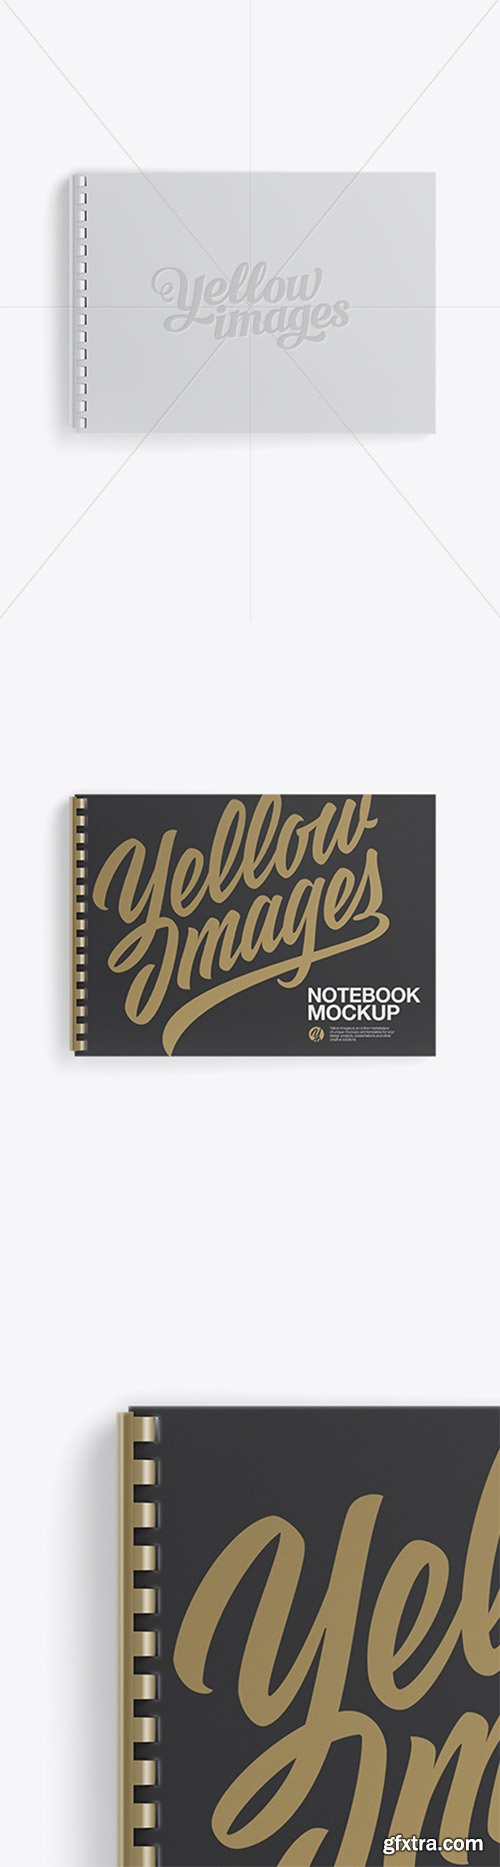 Download Notebook With Ring Binger Mockup - Top View 19097 » GFxtra